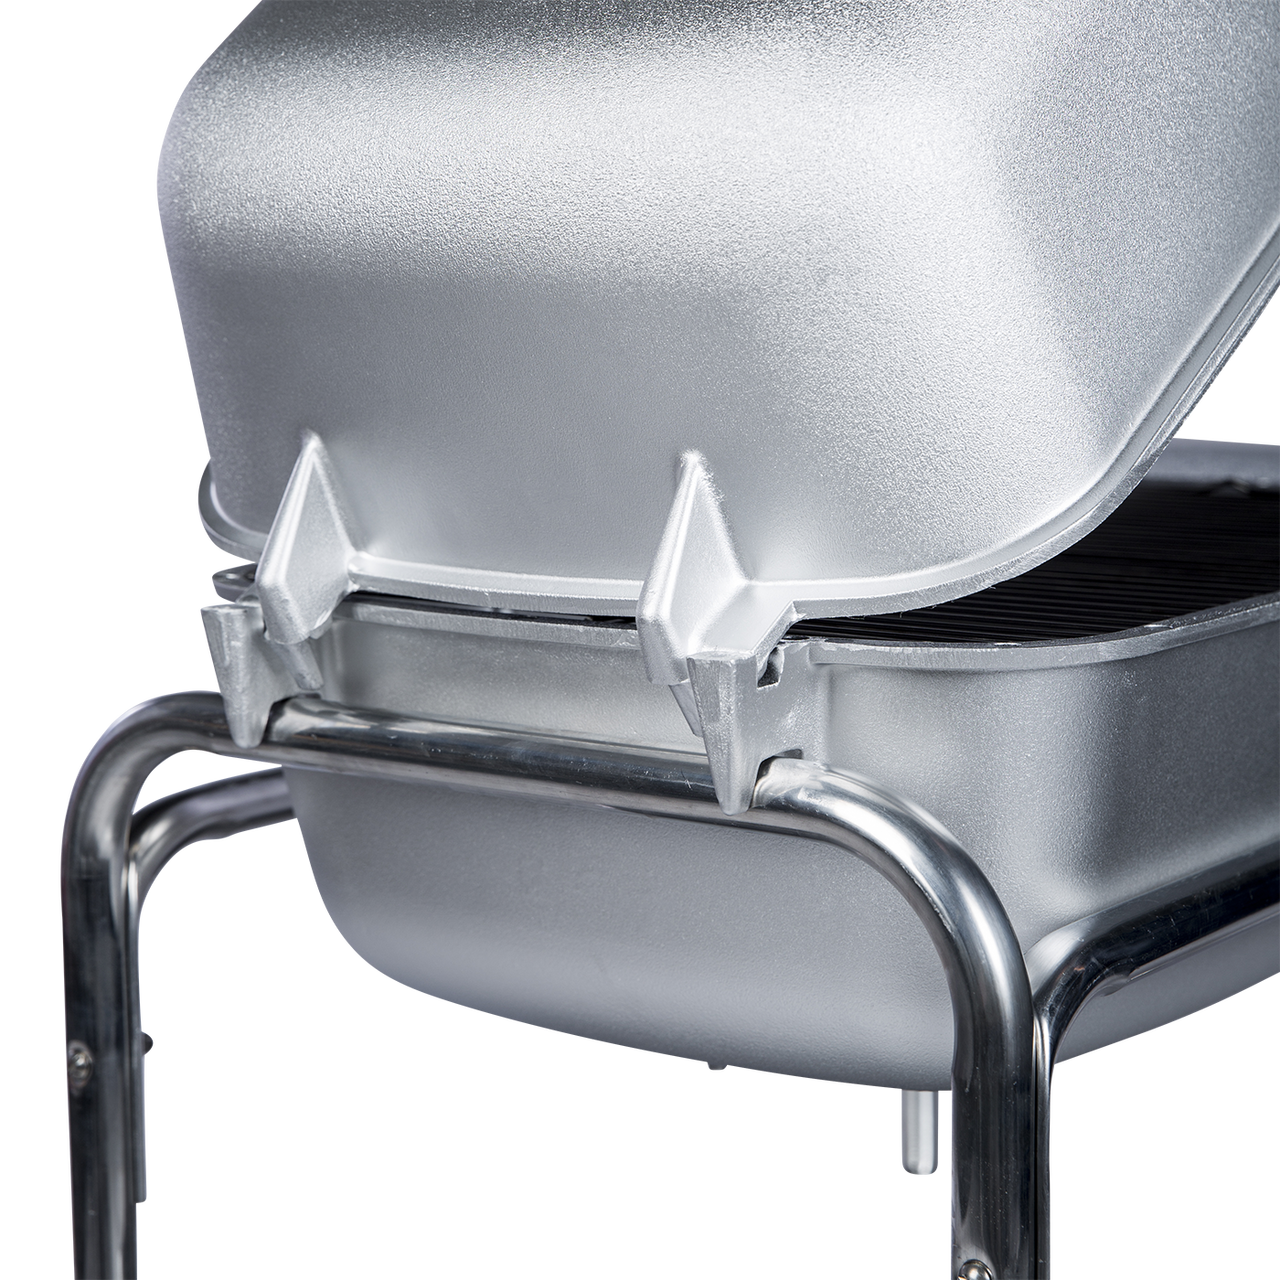 The Original PK Charcoal Grill in Classic Silver